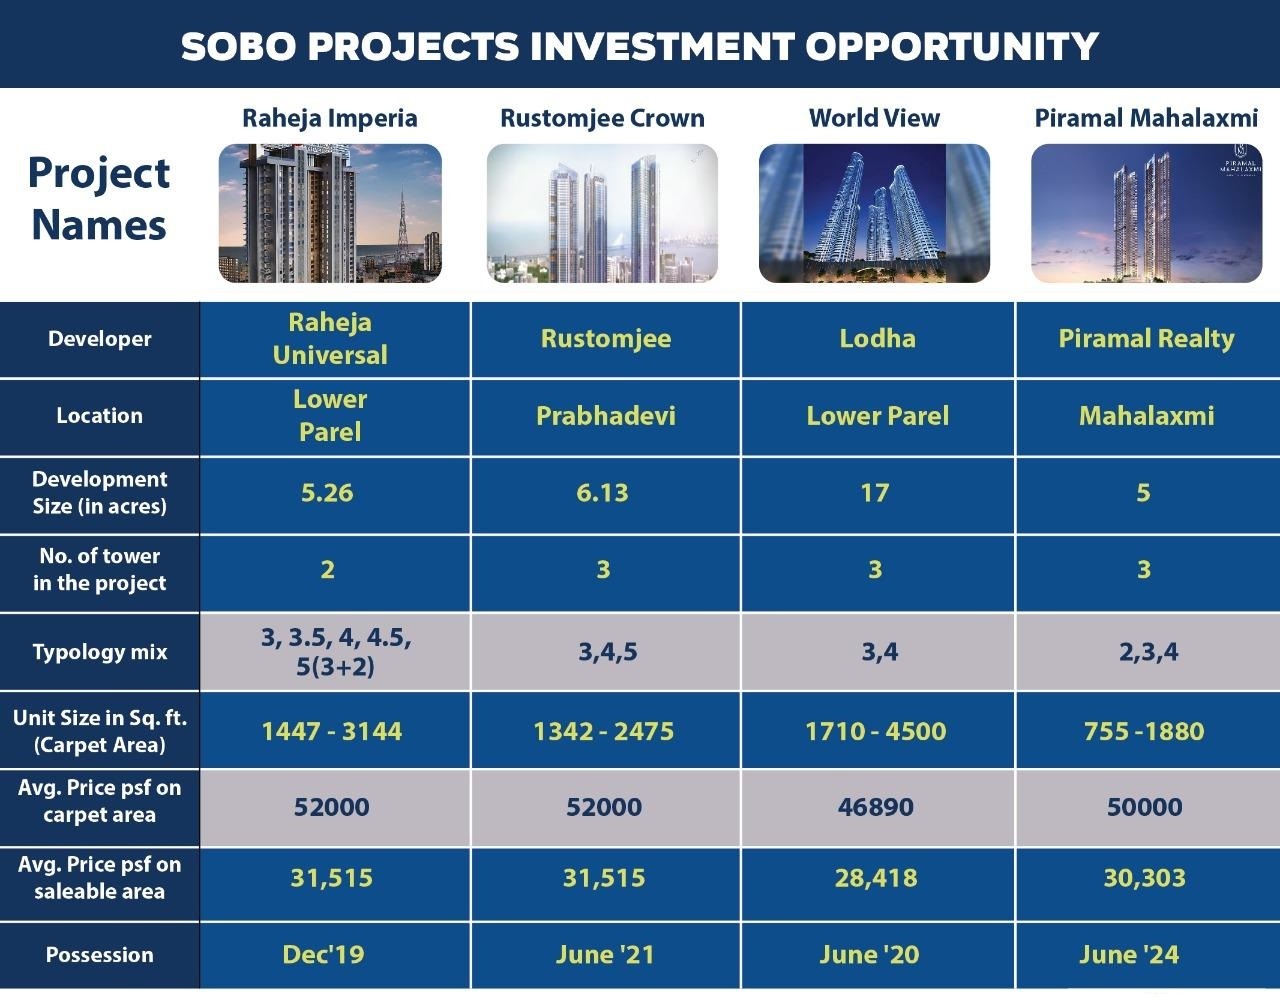 Trending investment opportunity projects in South Mumbai Update